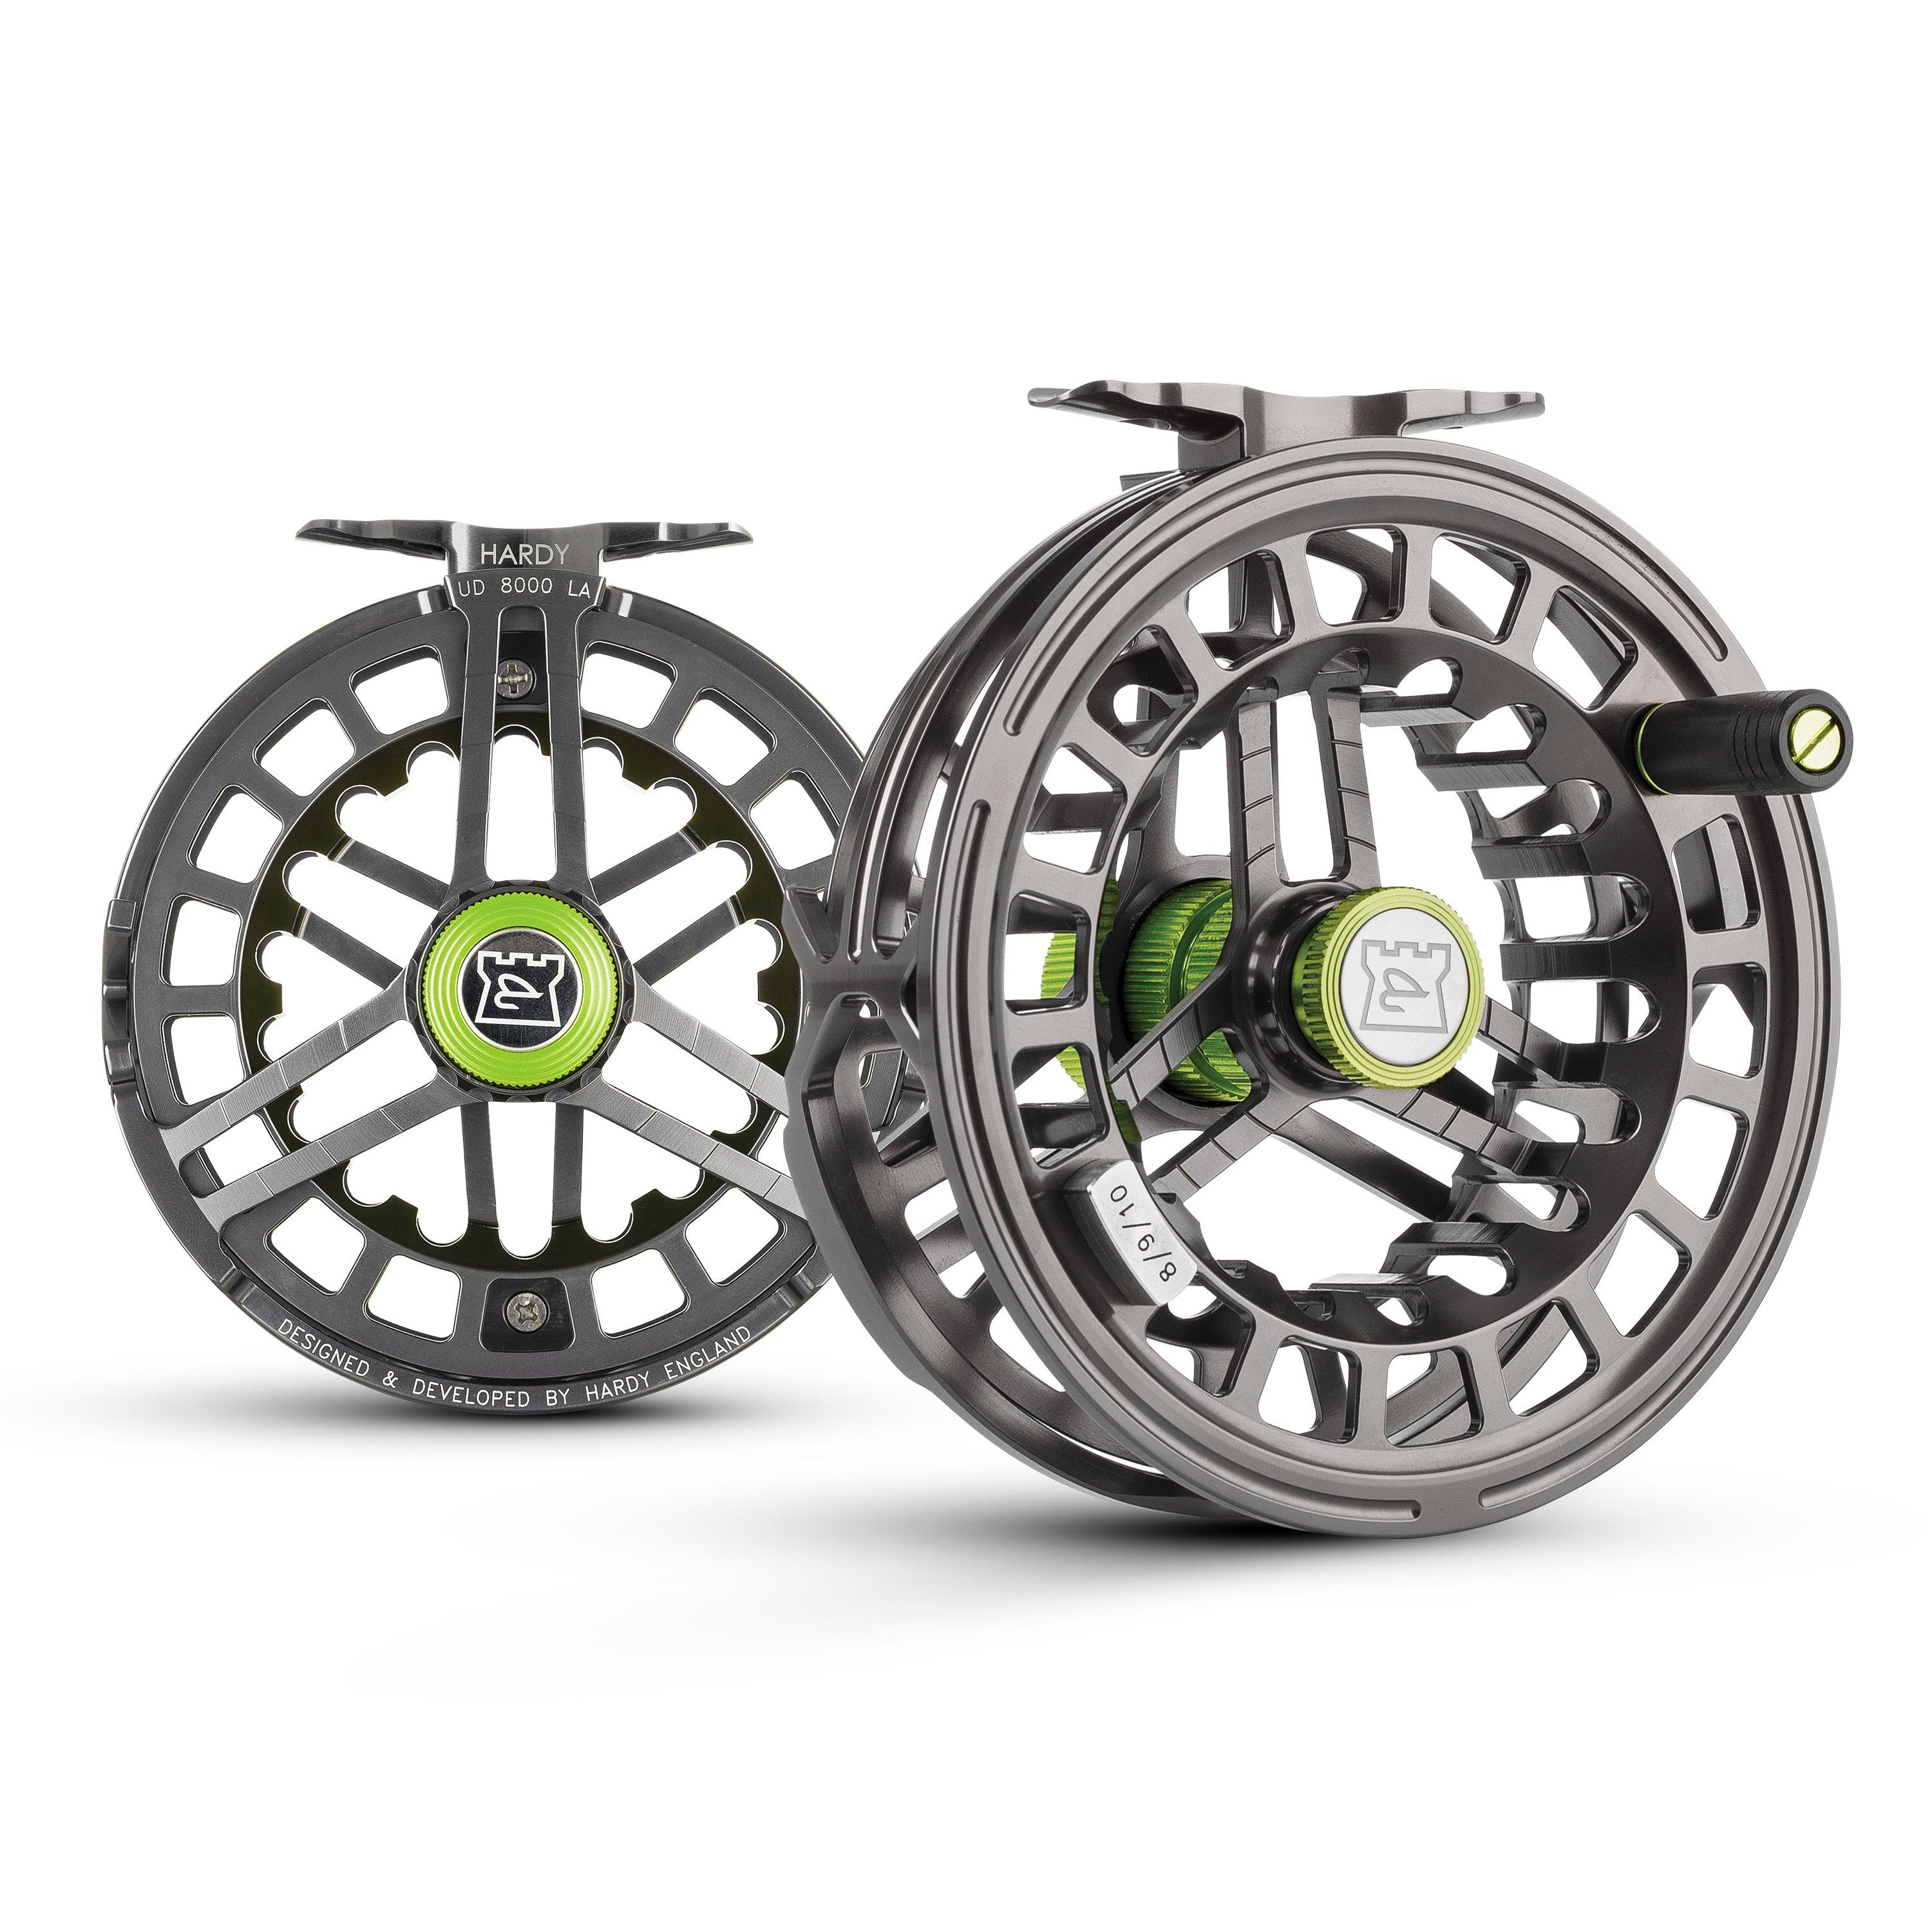 Hardy Zane Carbon Fly Reel - Size 6000 (6/7/8) - NEW - Free Fly